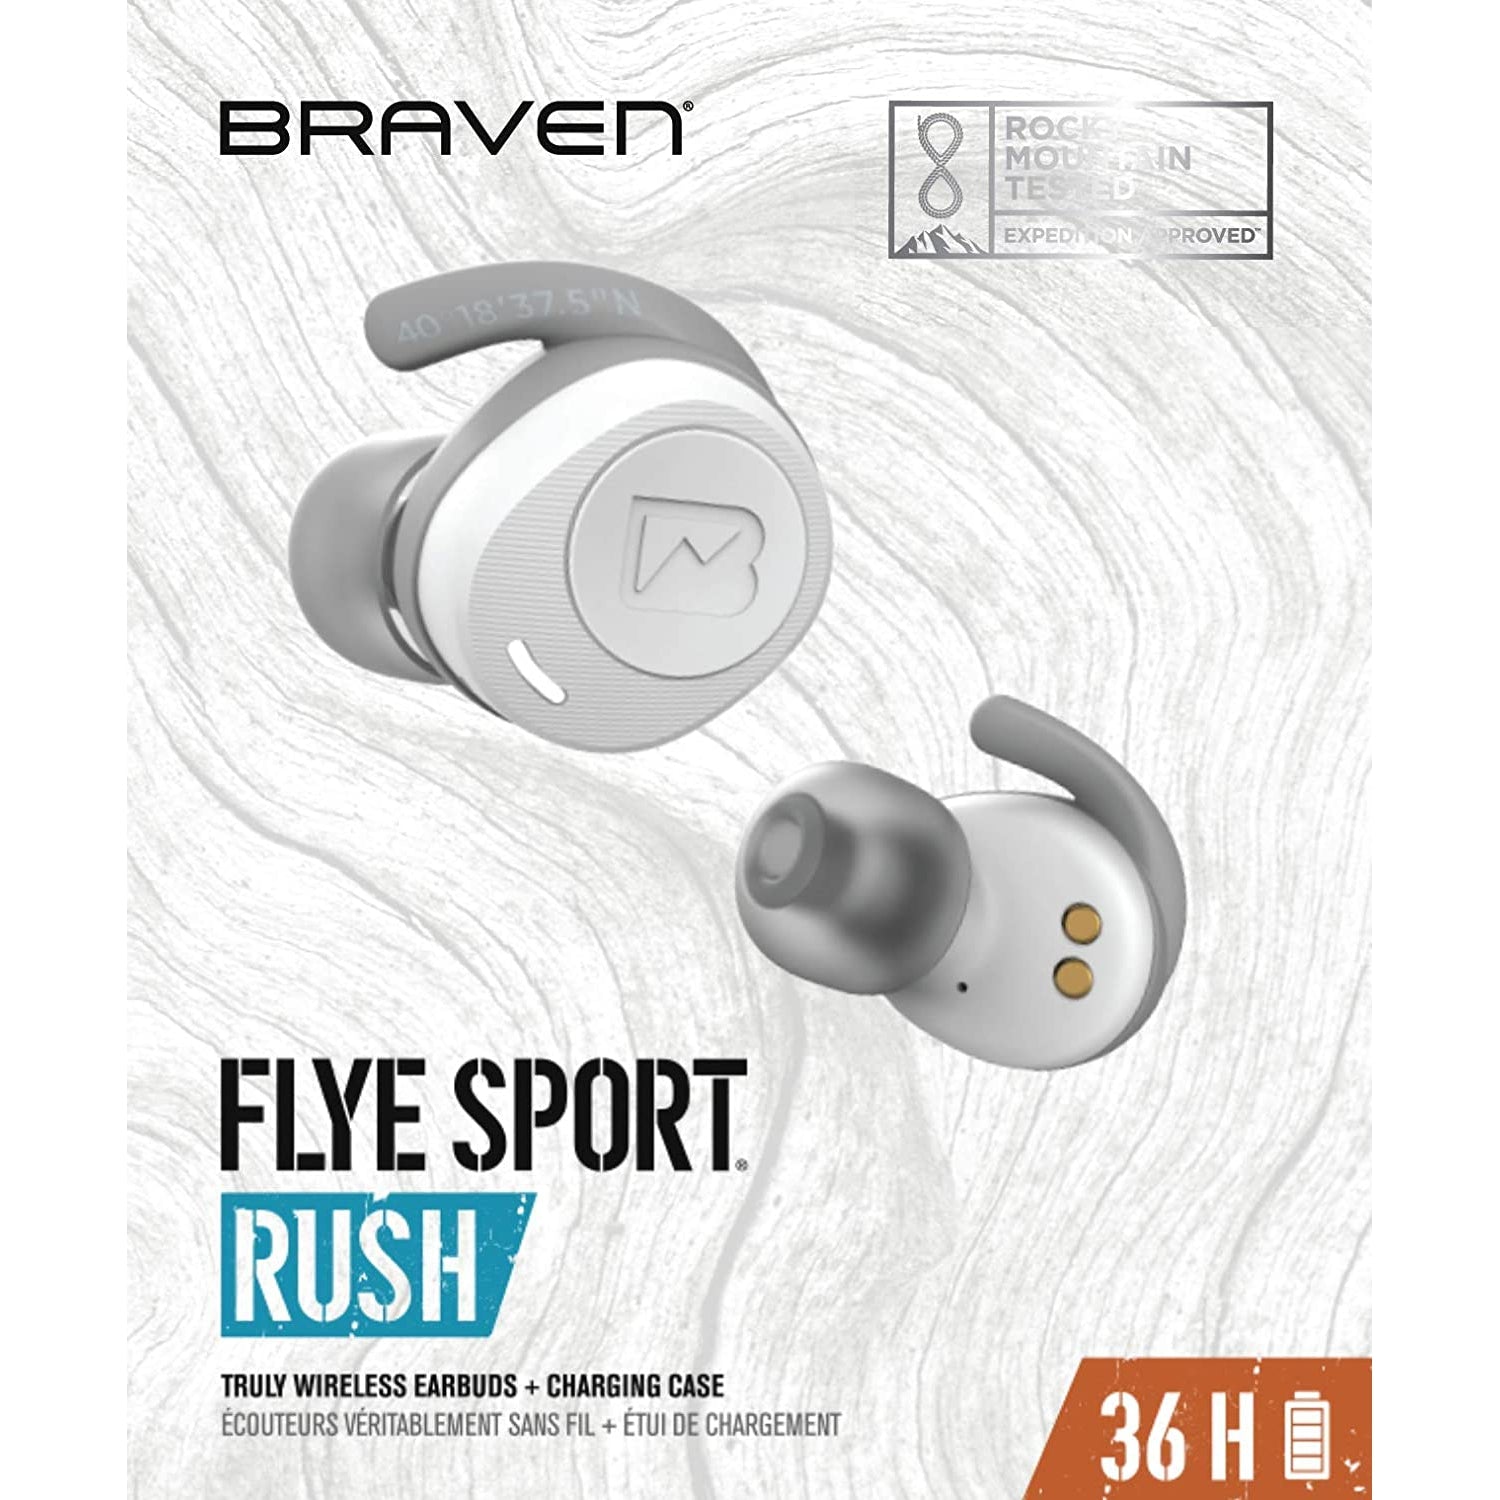 Braven Flye Sport Rush Earphones with Burst Charge and Charging Case - White